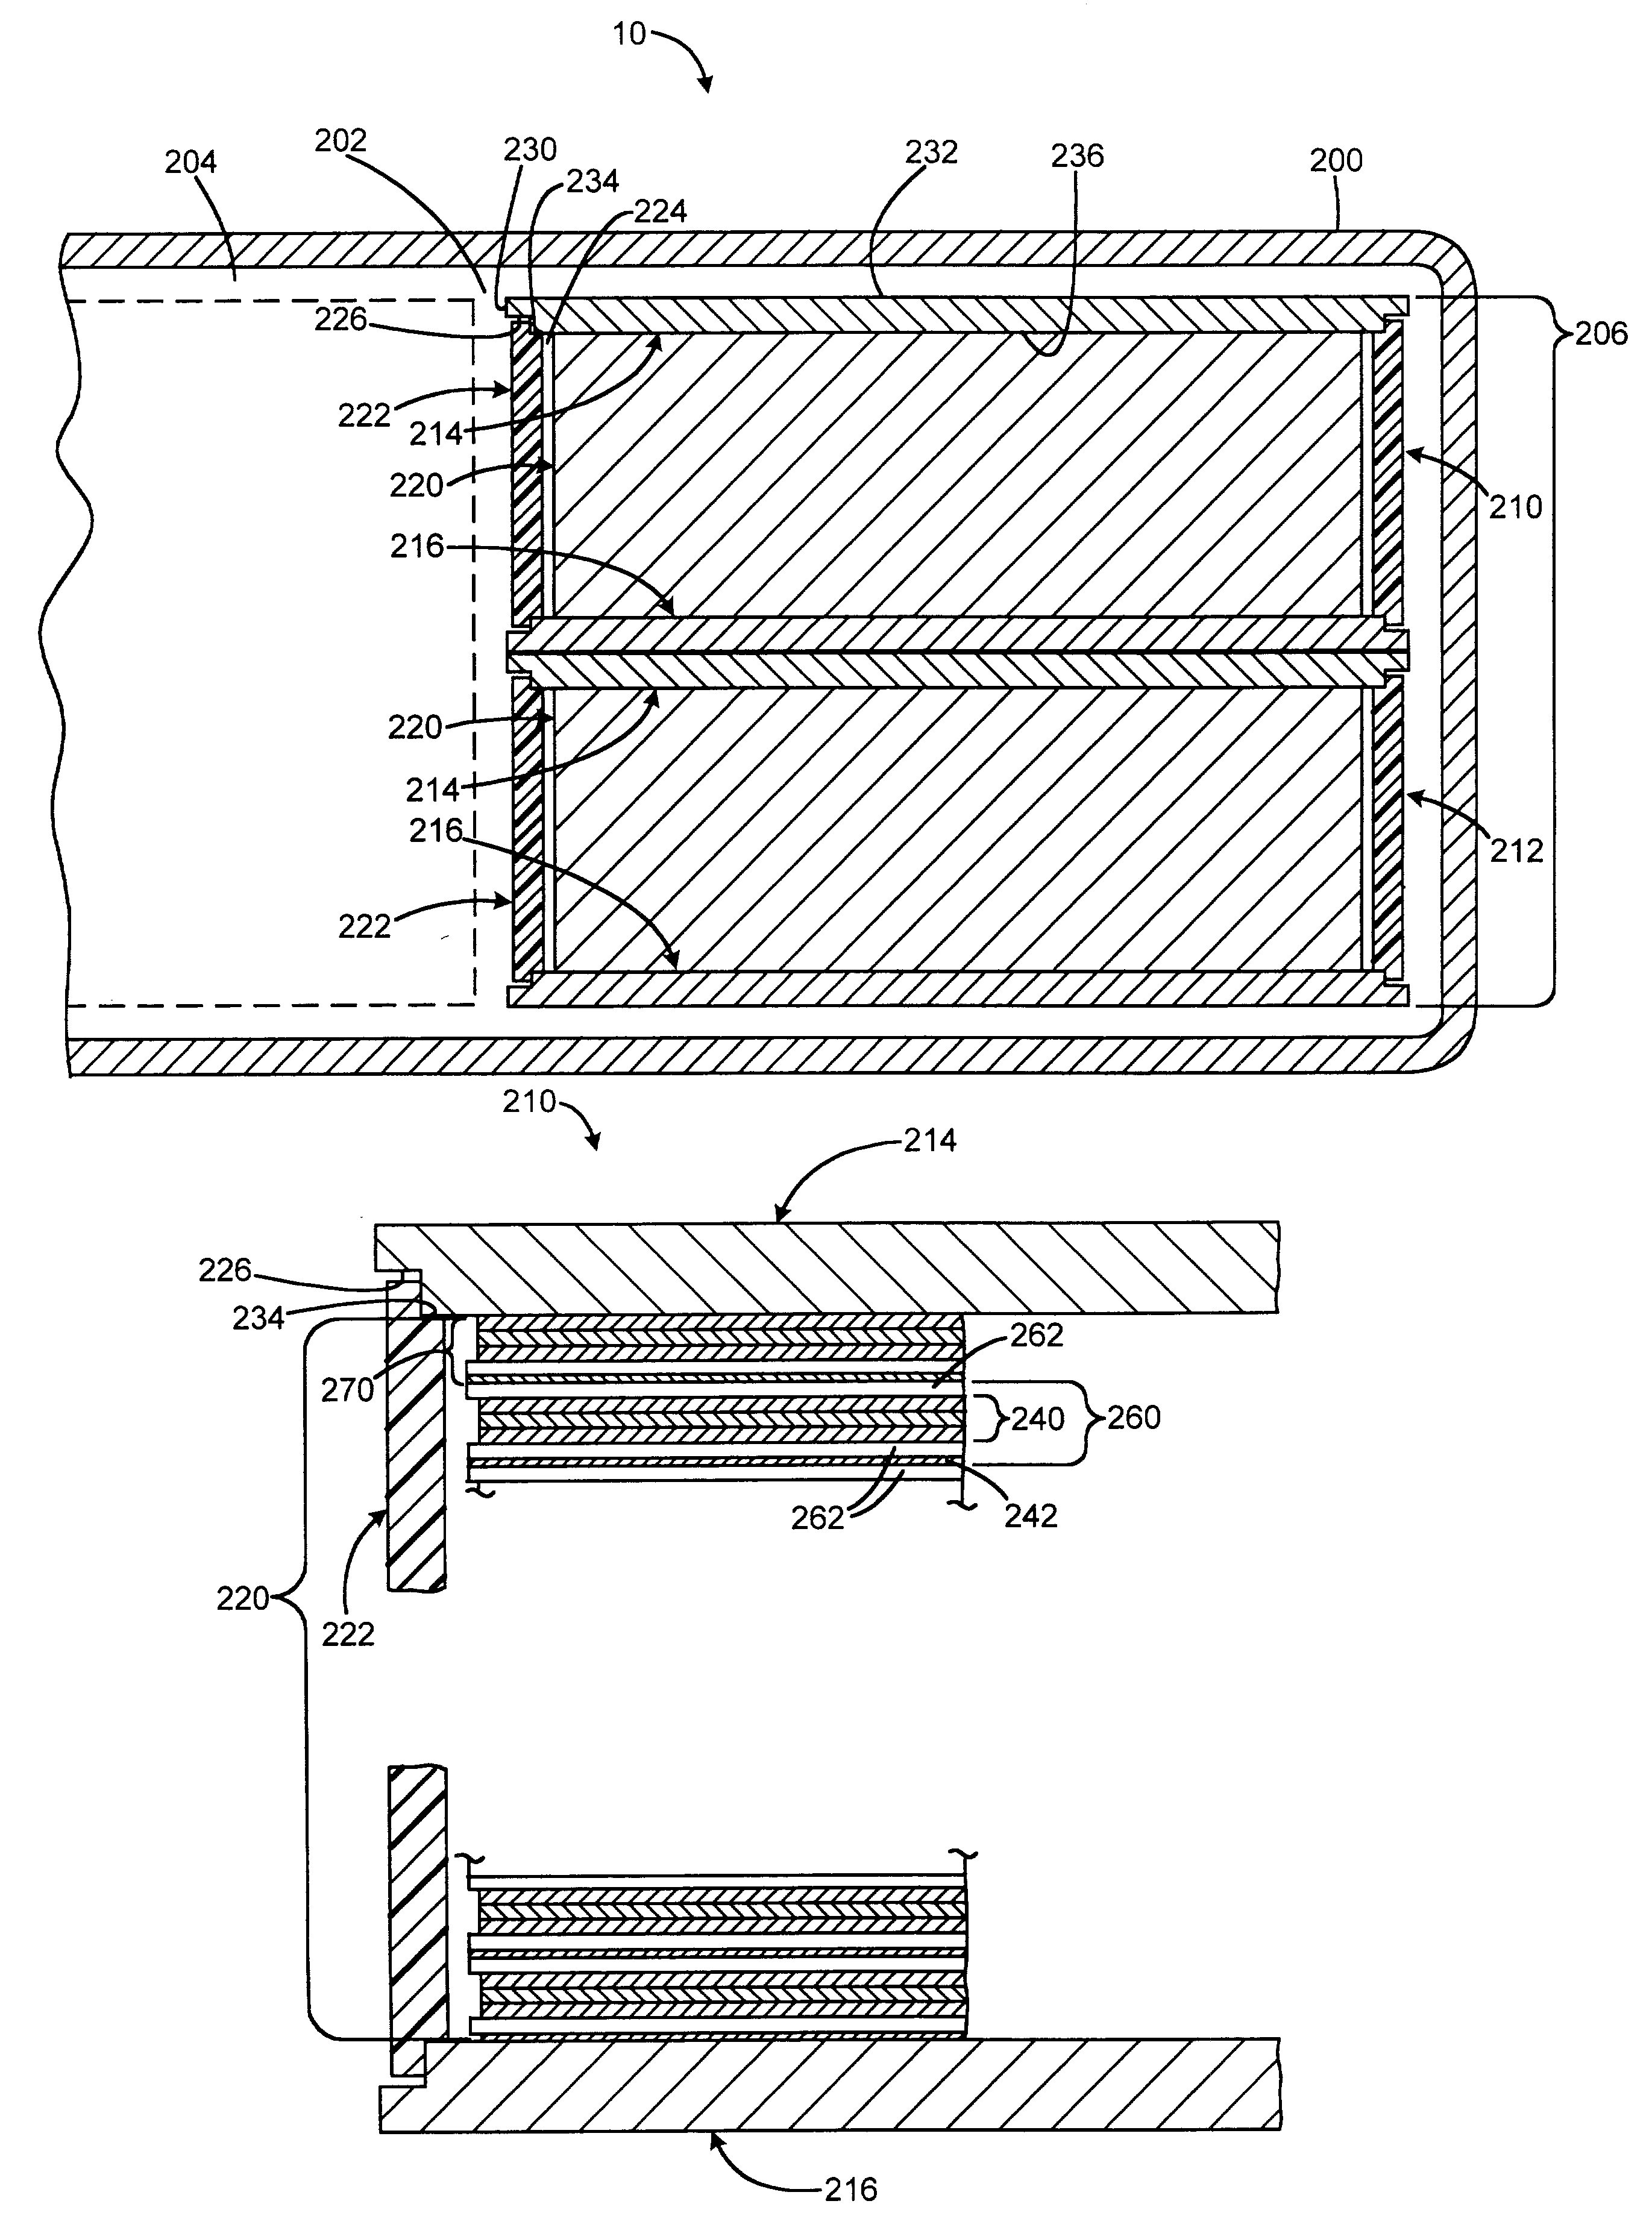 Stackable capacitor having opposed contacts for an implantable electronic medical device